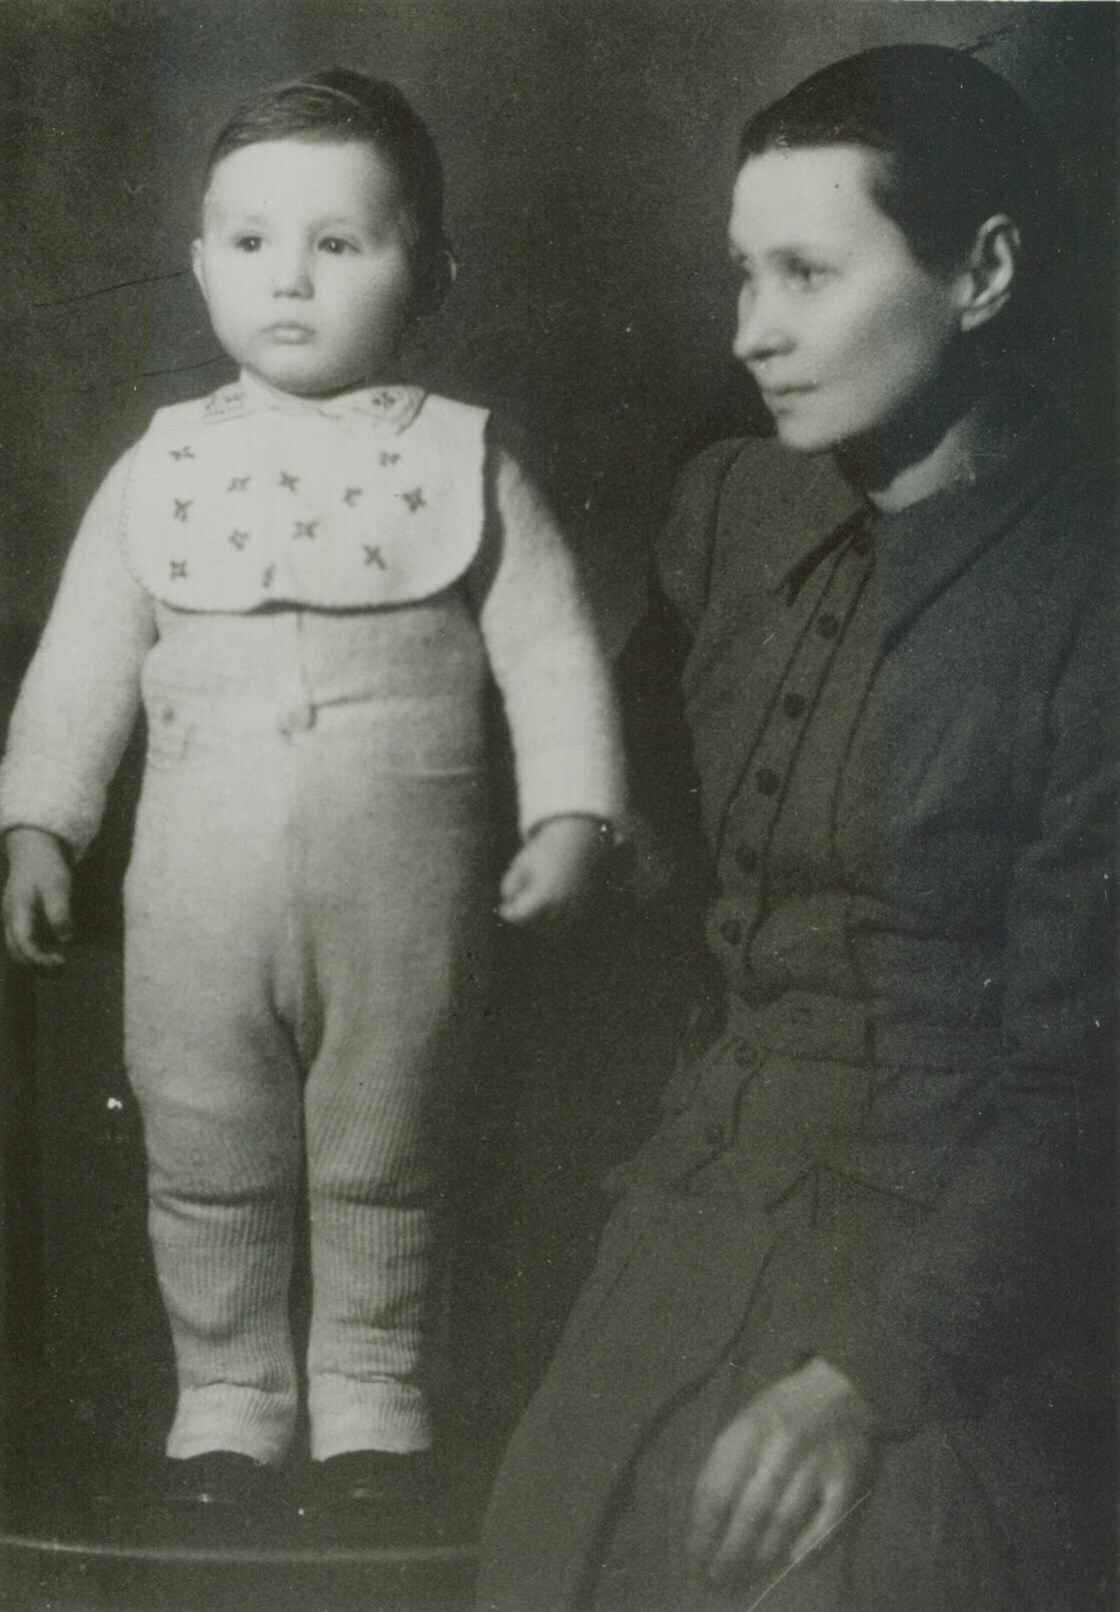 In this September 1941 photo, Holocaust survivor Abe Foxman stands for a portrait with his Polish Catholic nanny, Bronislawa Kurpitaken, in Vilnius, Lithuania. Foxman's parents left him with Kurpitaken in 1941 when they were ordered by Germans to enter a ghetto. Foxman was baptized and given the Christian name of Henryk Stanislaw Kurpi, and raised as a Catholic in Vilnius between 1941 and 1944 when he was returned to his parents.  He later became the head of the ADL – a position he held for nearly 50 years